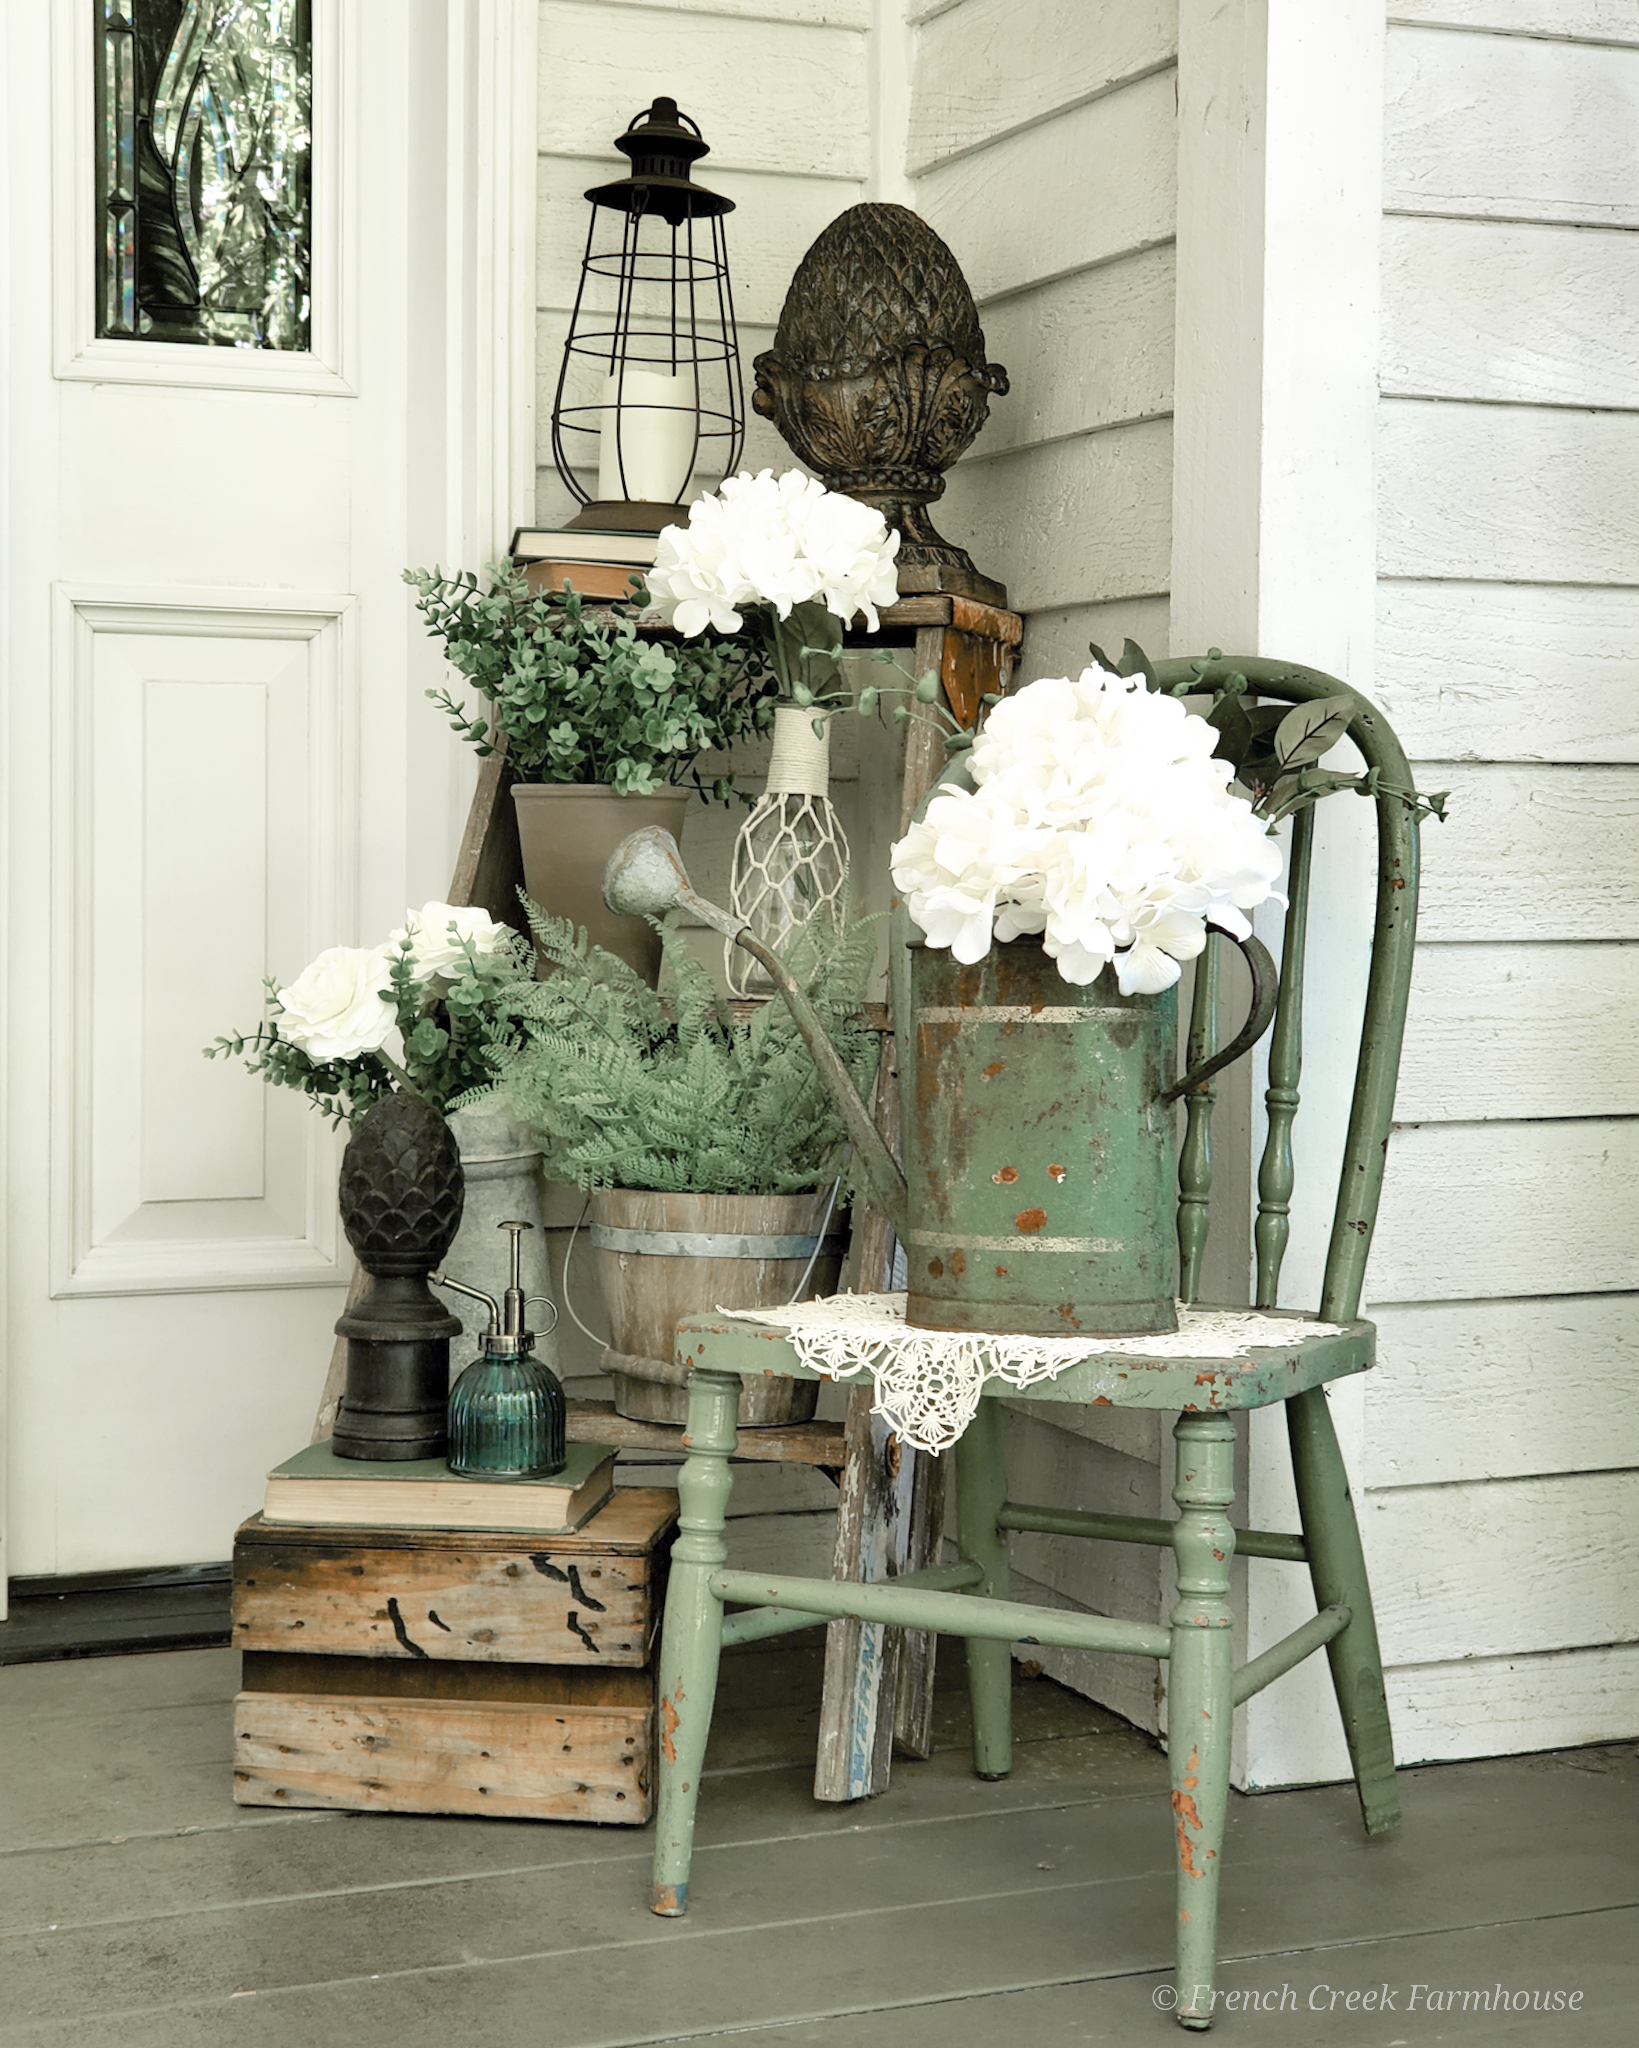 I'm using lots of spring blooms and vintage touches to decorate our porch this season